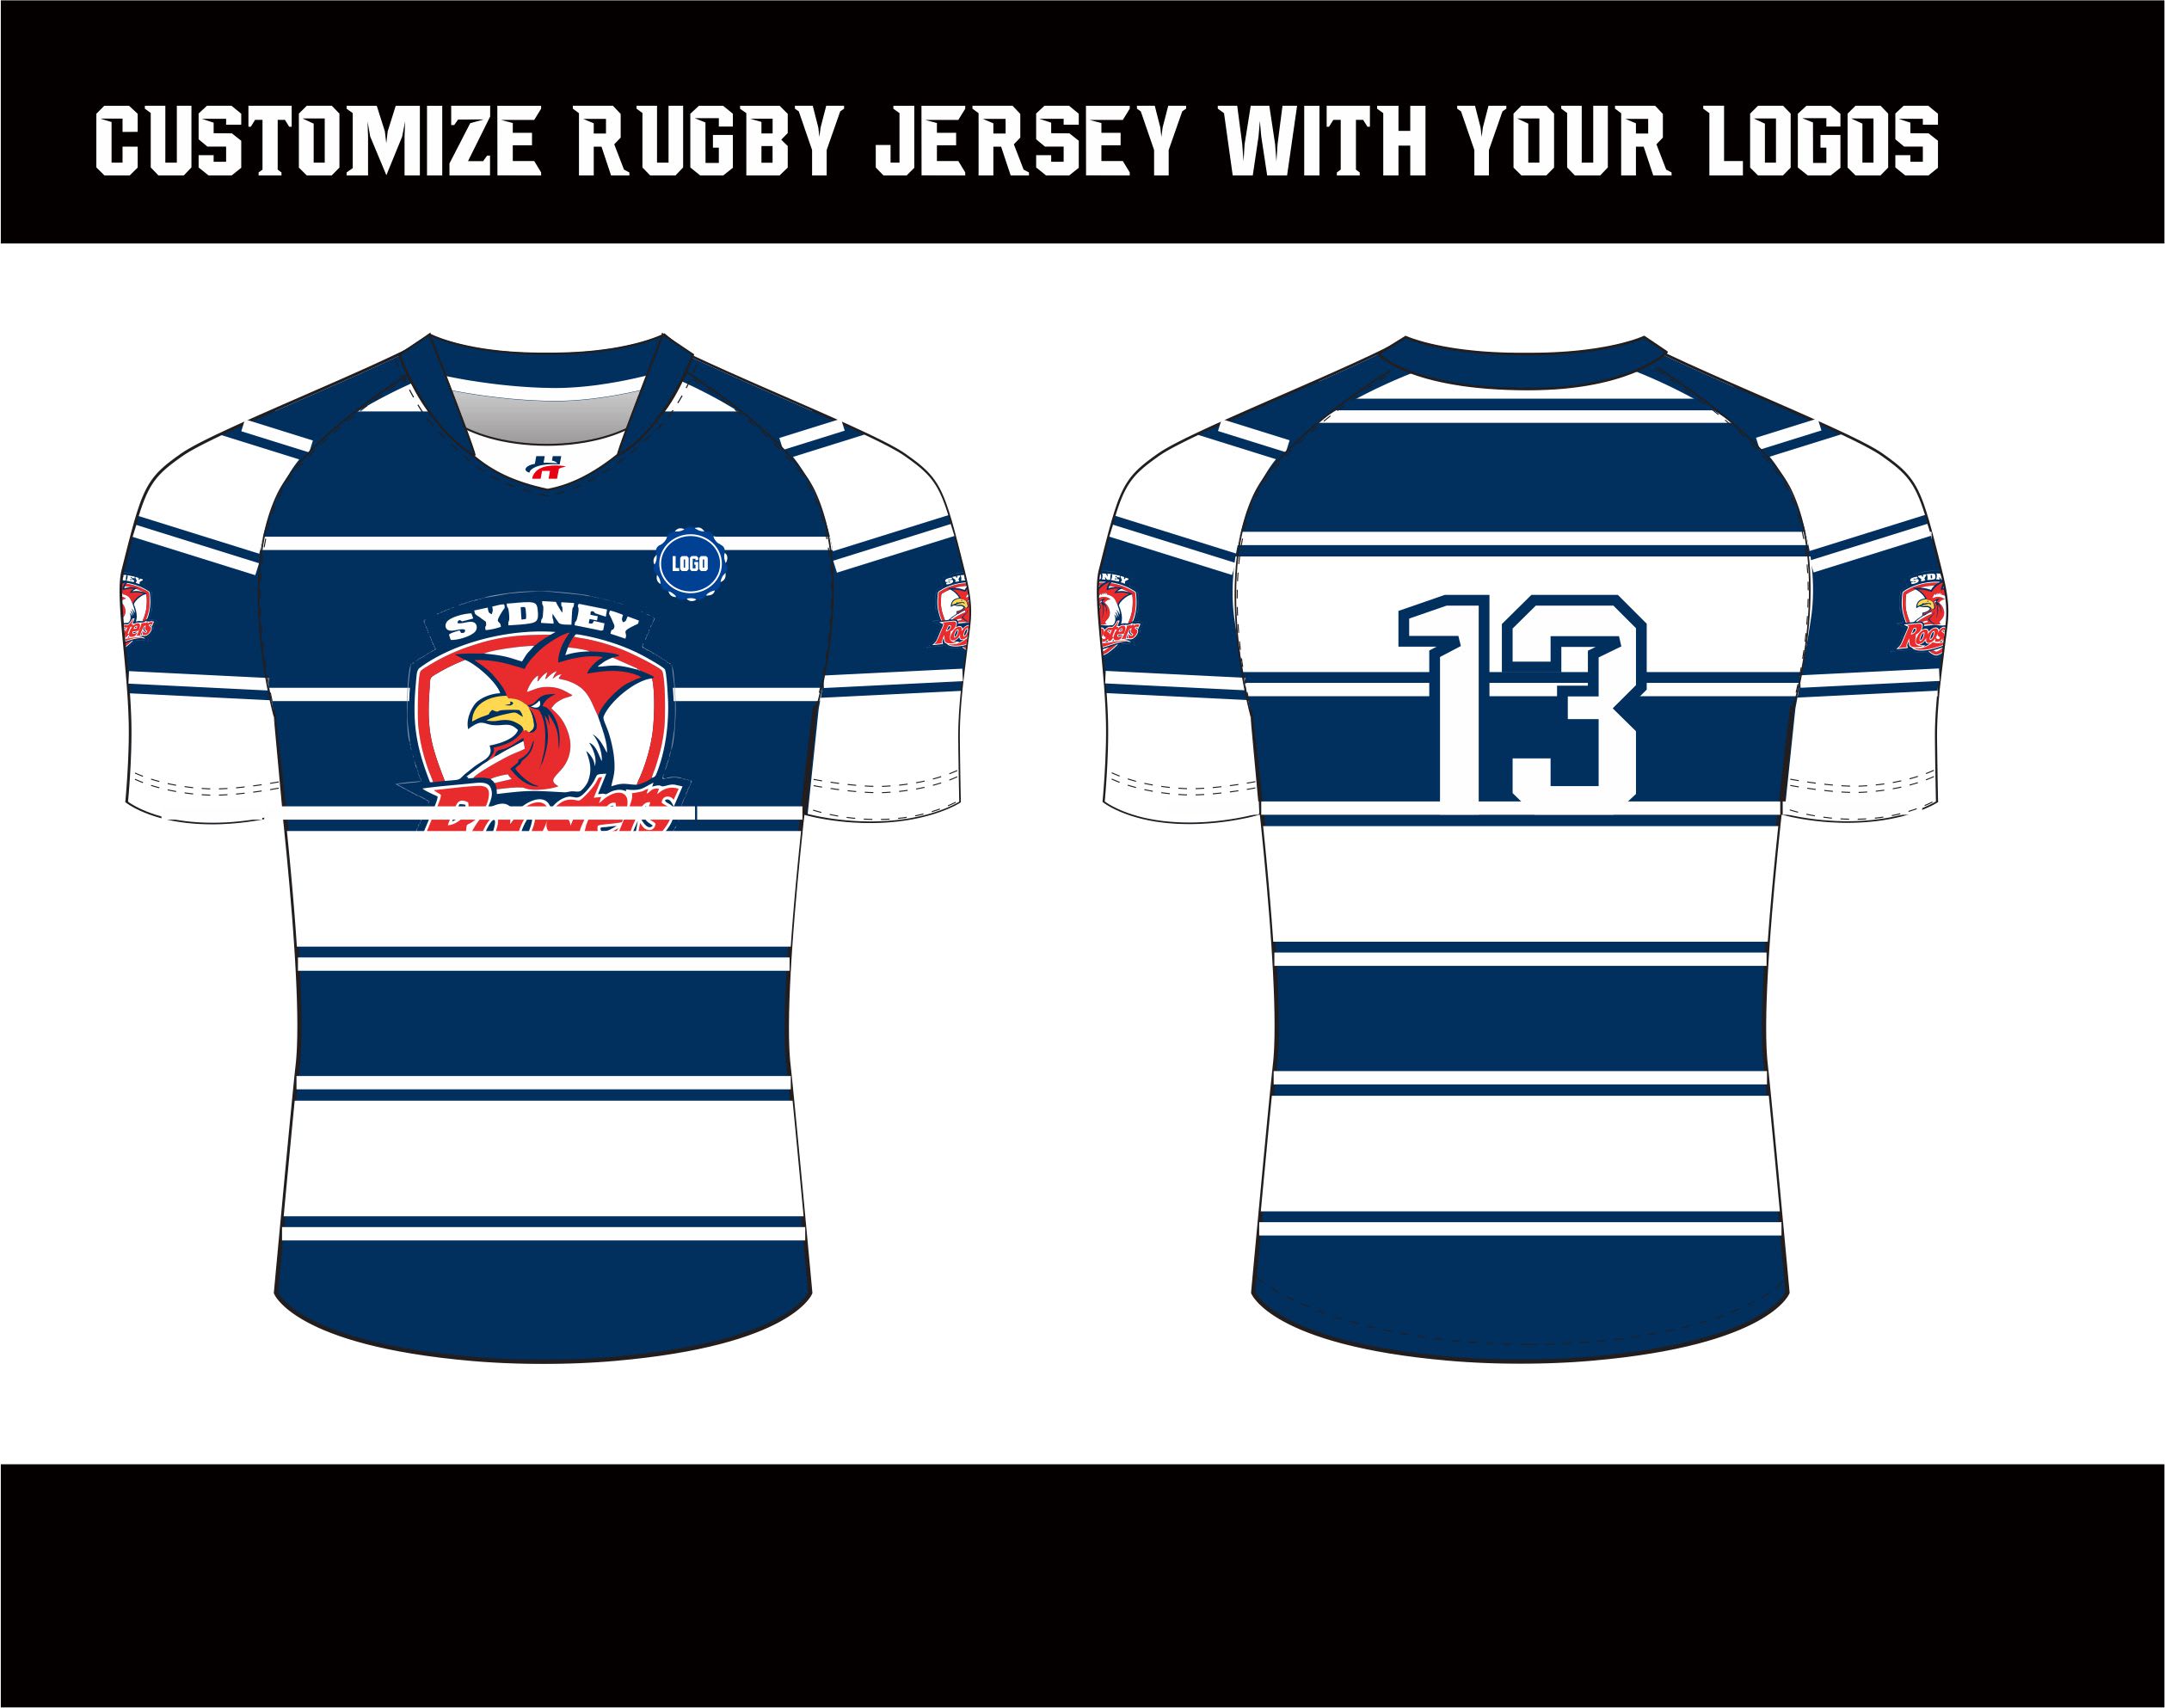 Rugby Jersey Projects  Photos, videos, logos, illustrations and